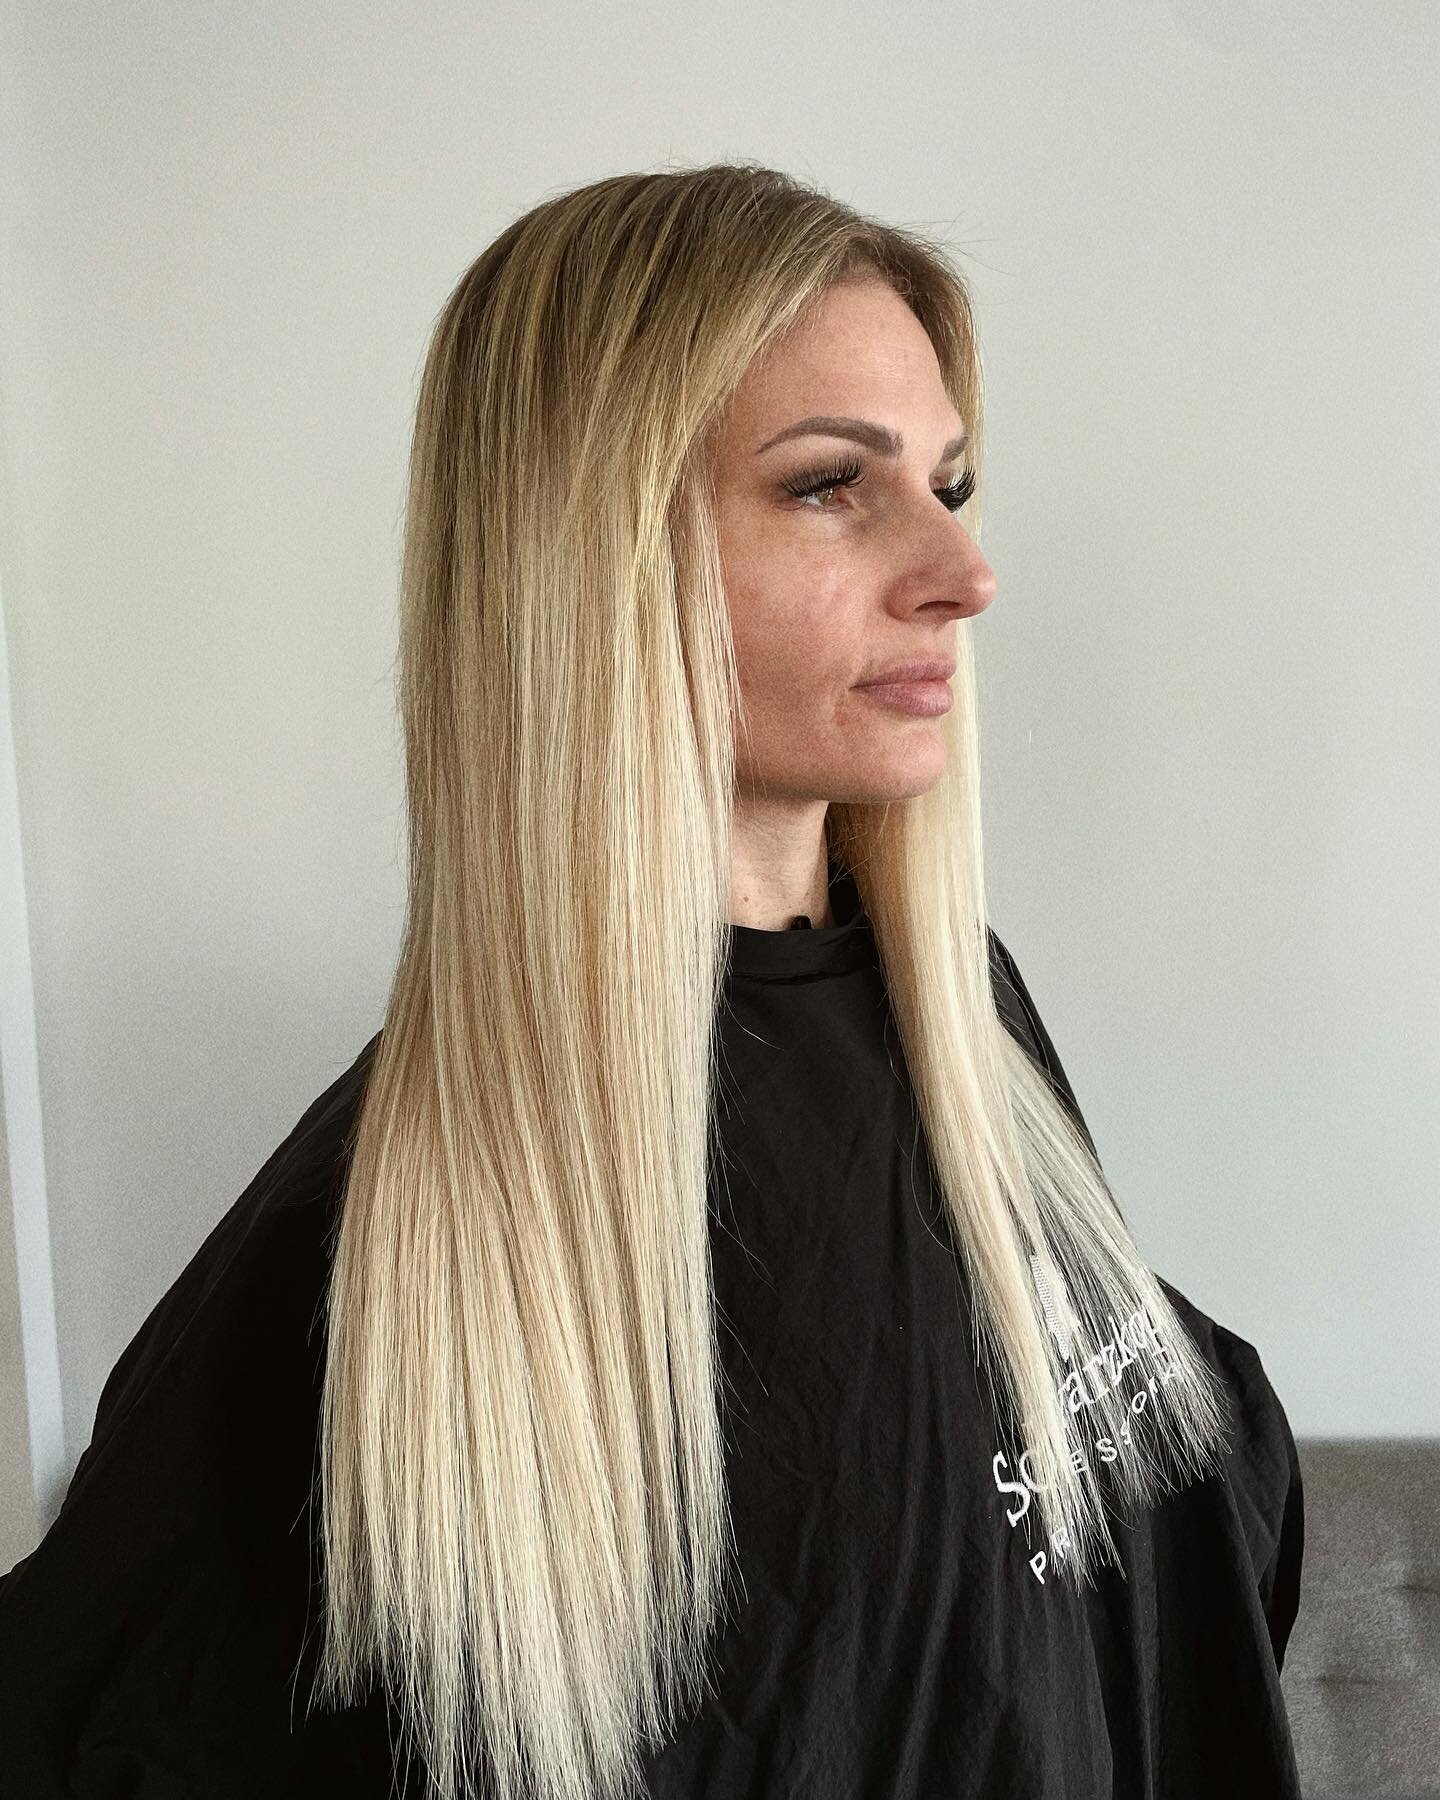 Here is a little behind the scenes of me prepping for an extension install. 

Prepping the hair with a colour ensures the best natural unnoticeable results. 

The third picture is a comparison of her old hair and her new longer hair. 

To keep the ex